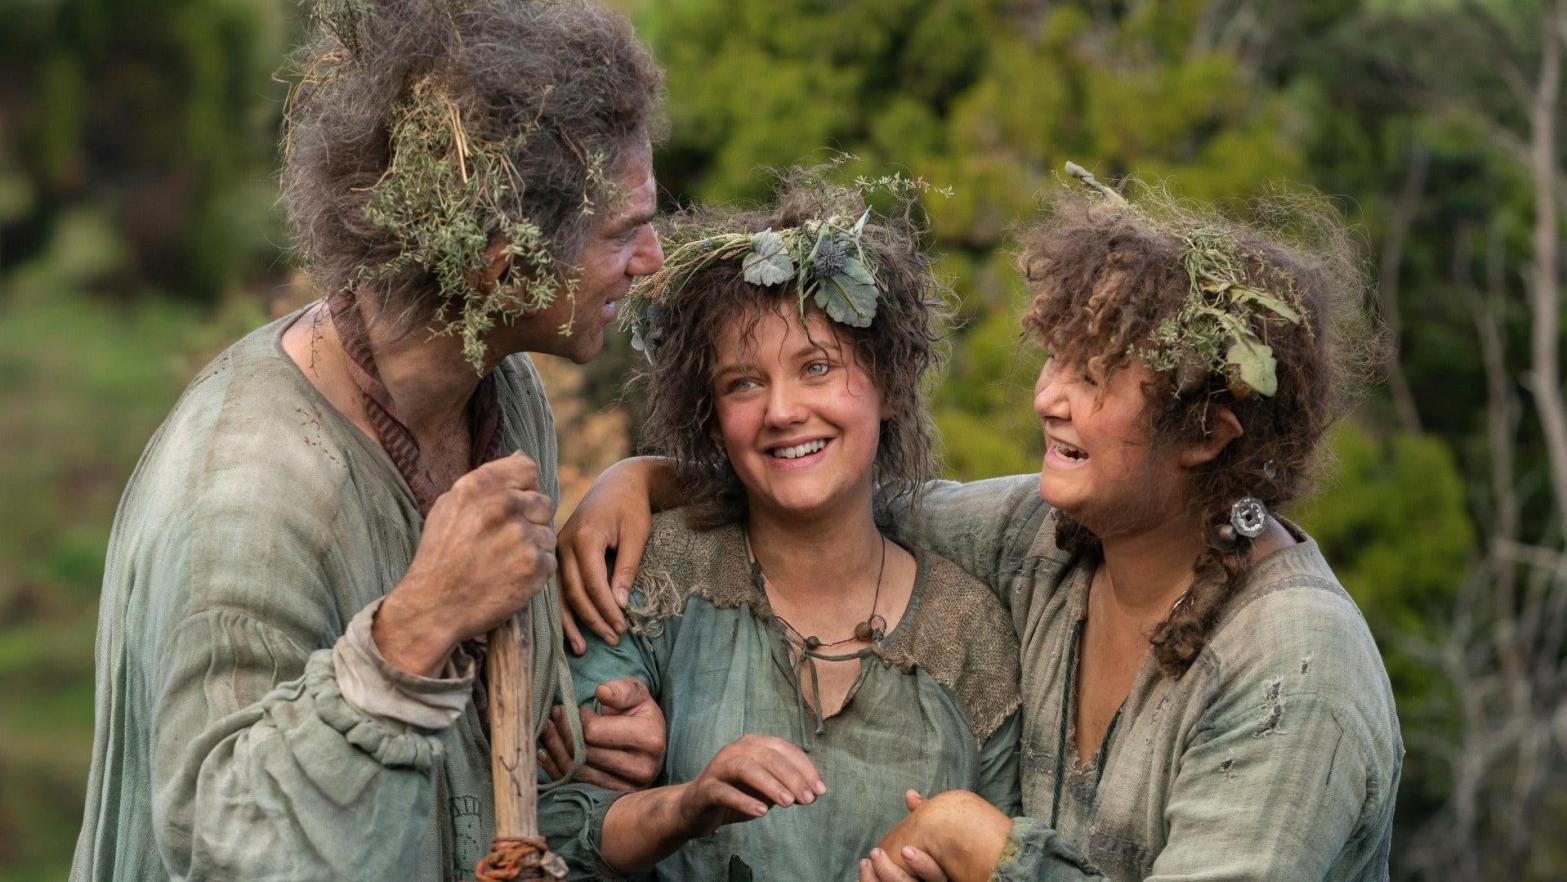 It's all smiles at camp Lord of the Rings. (Image: Prime Video)